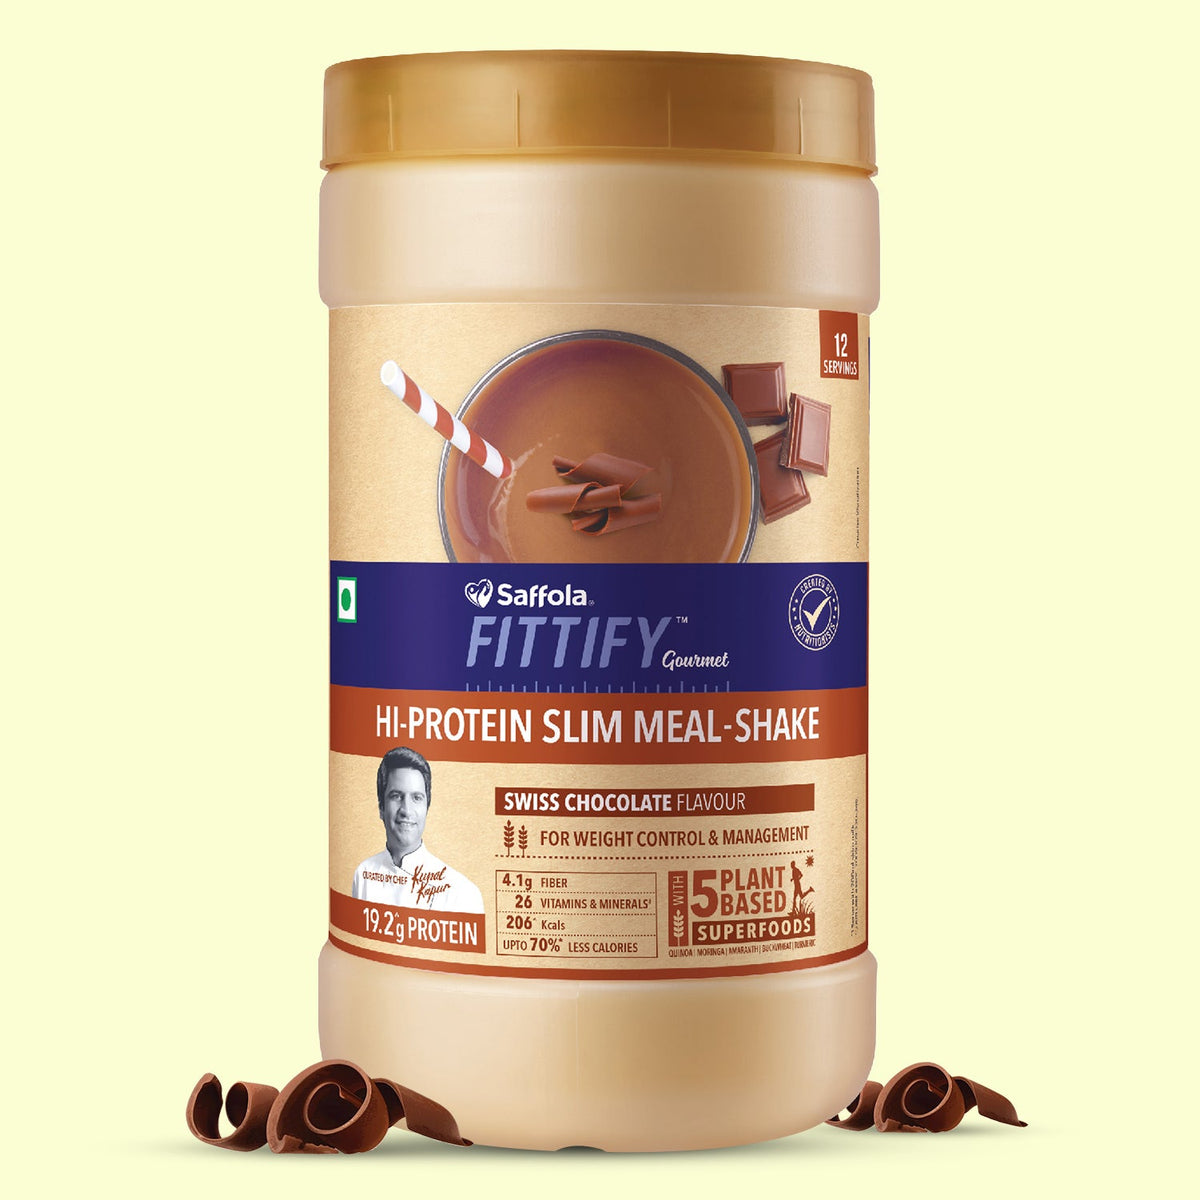 [CRED] Saffola Fittify Hi-Protein Slim Meal Shake - Swiss Chocolate - Pack of 1 - 420g